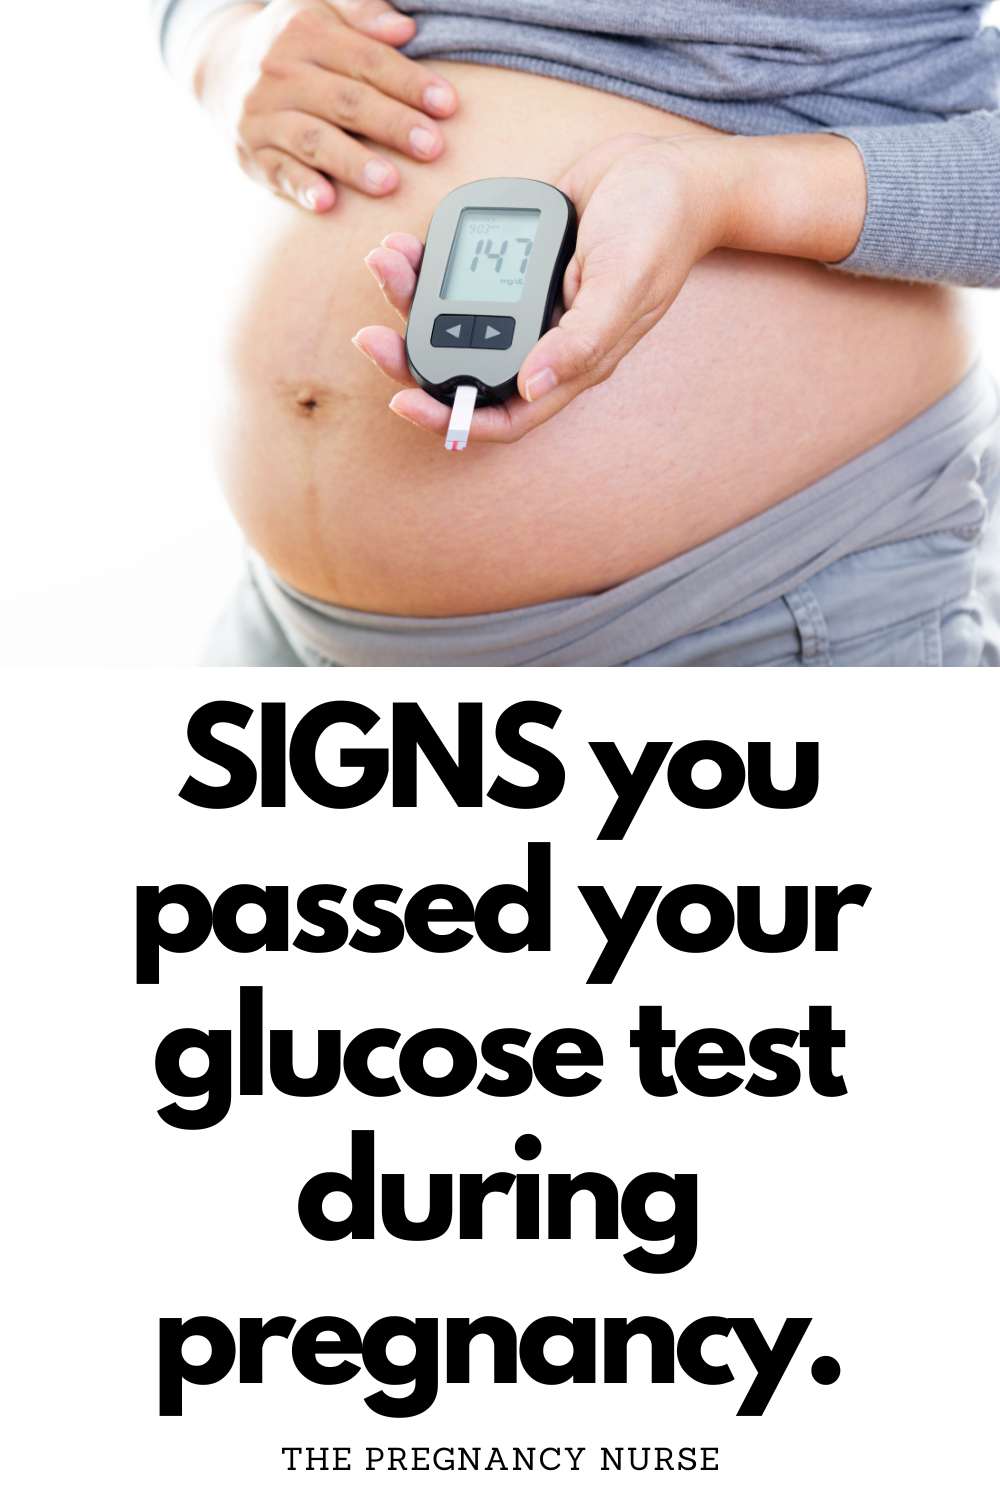 If you're pregnant, it's important to maintain a healthy diet and lifestyle. One of the essential tests to track mom and baby's health during pregnancy is called the glucose test. This test helps detect any potential issues related to gestational diabetes while also providing baseline values which can be tracked as the pregnancy progresses. So how do you know if you passed your glucose screening? Let's look at some of the tell-tale signs!